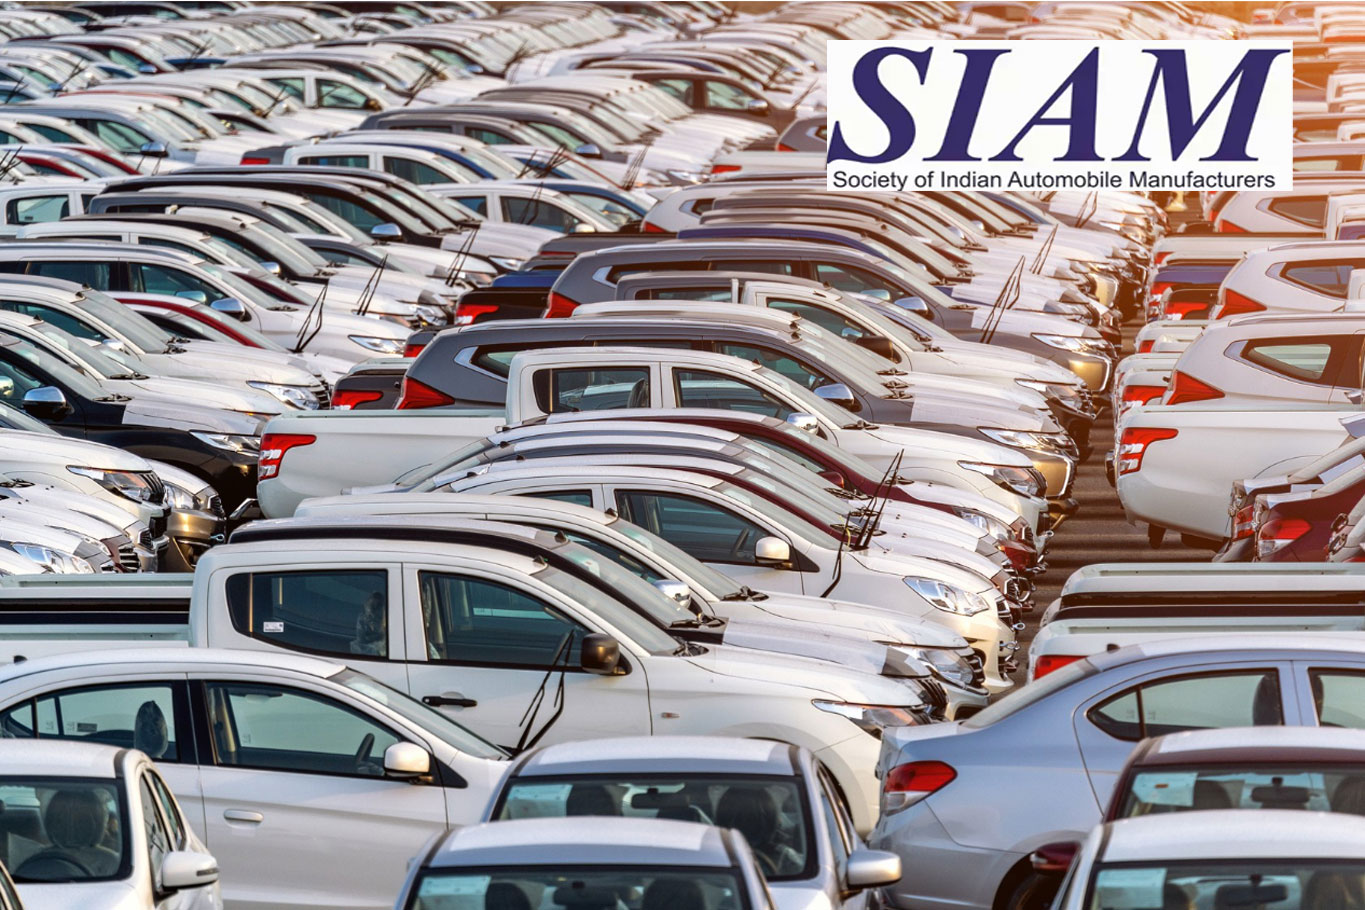 June witnesses a surge in domestic sales of PVs, three-wheelers, and two-wheelers: SIAM.